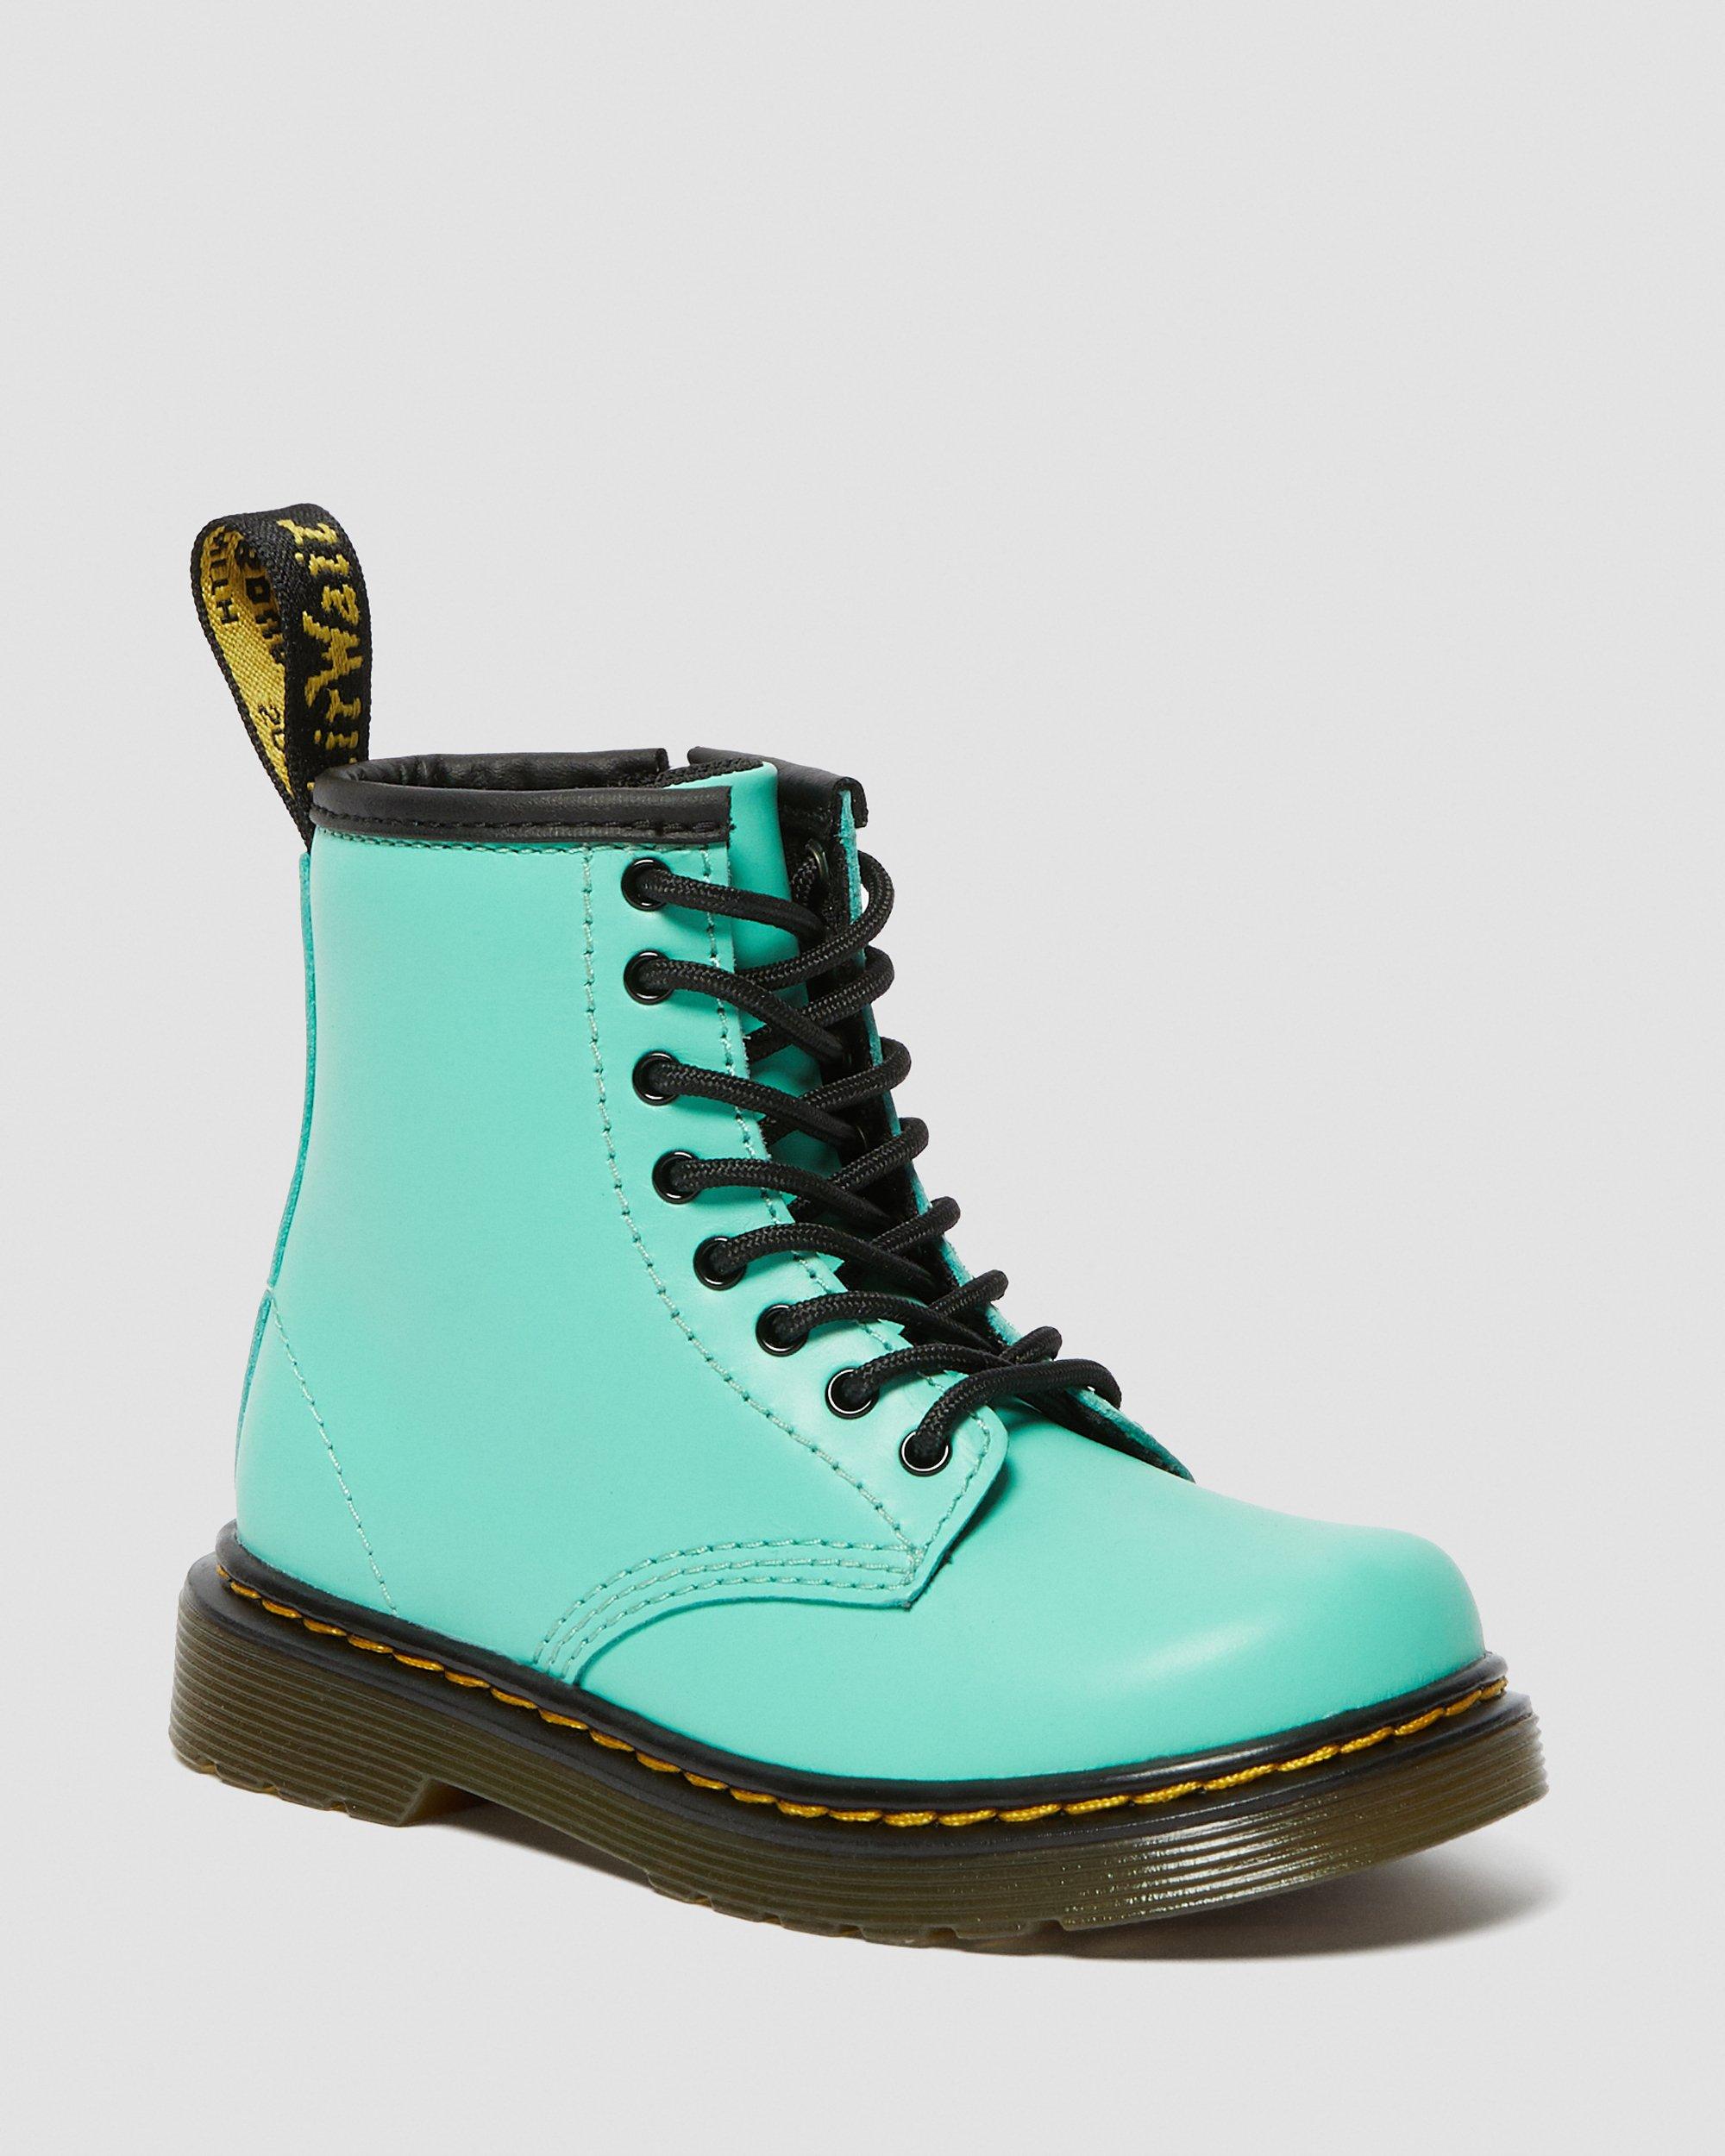 Toddler 1460 Muted Leather Lace Up Boots in Peppermint Green | Dr. Martens